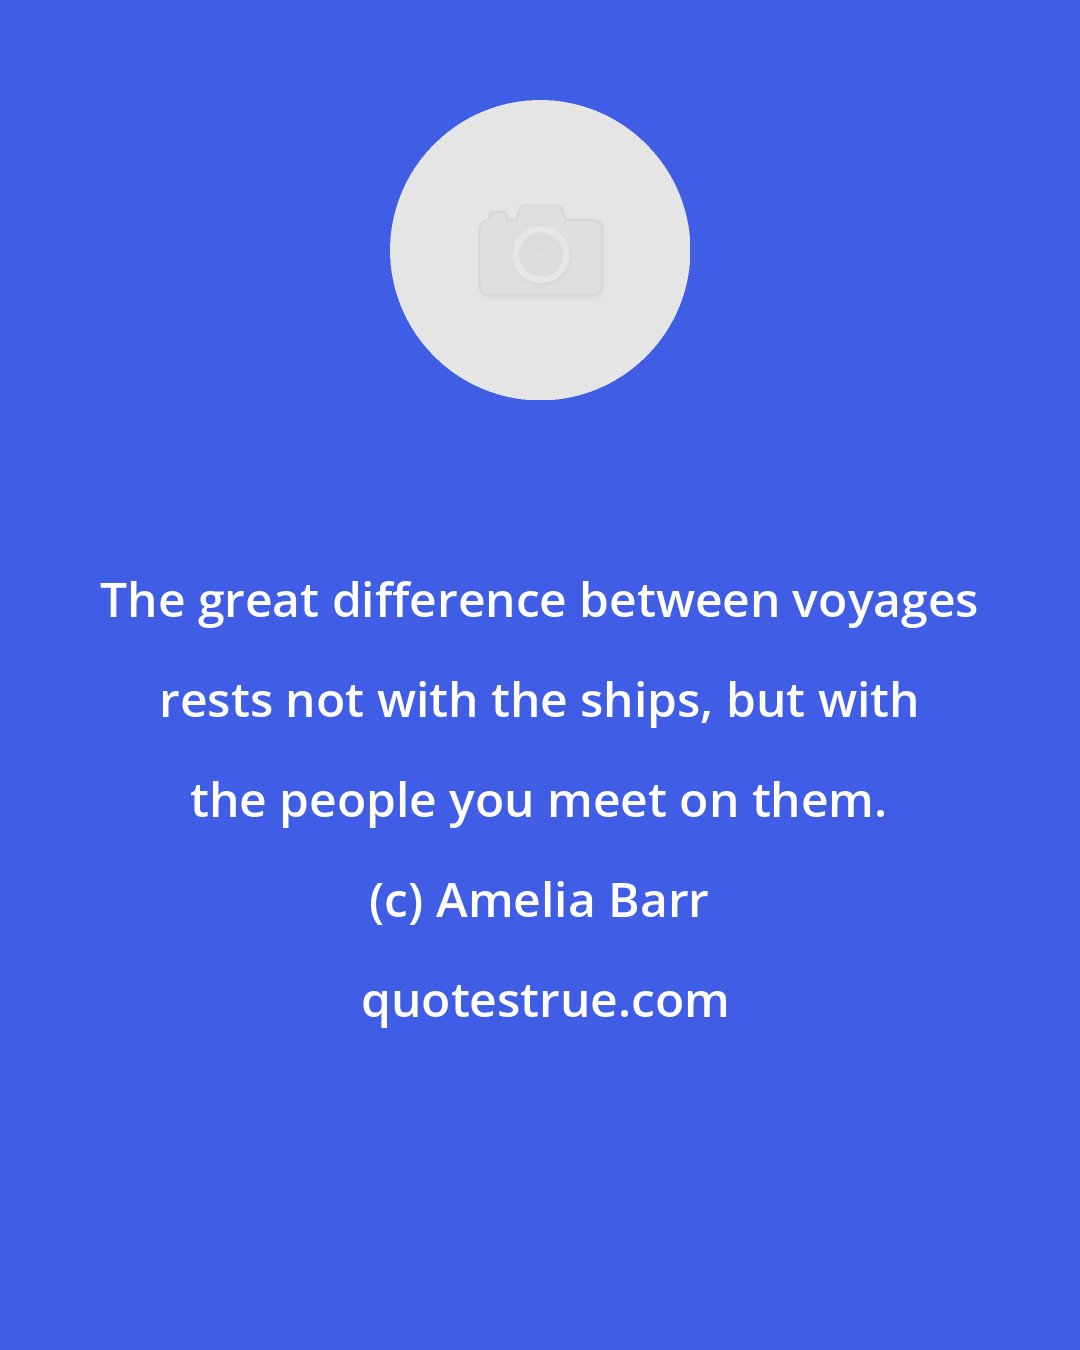 Amelia Barr: The great difference between voyages rests not with the ships, but with the people you meet on them.